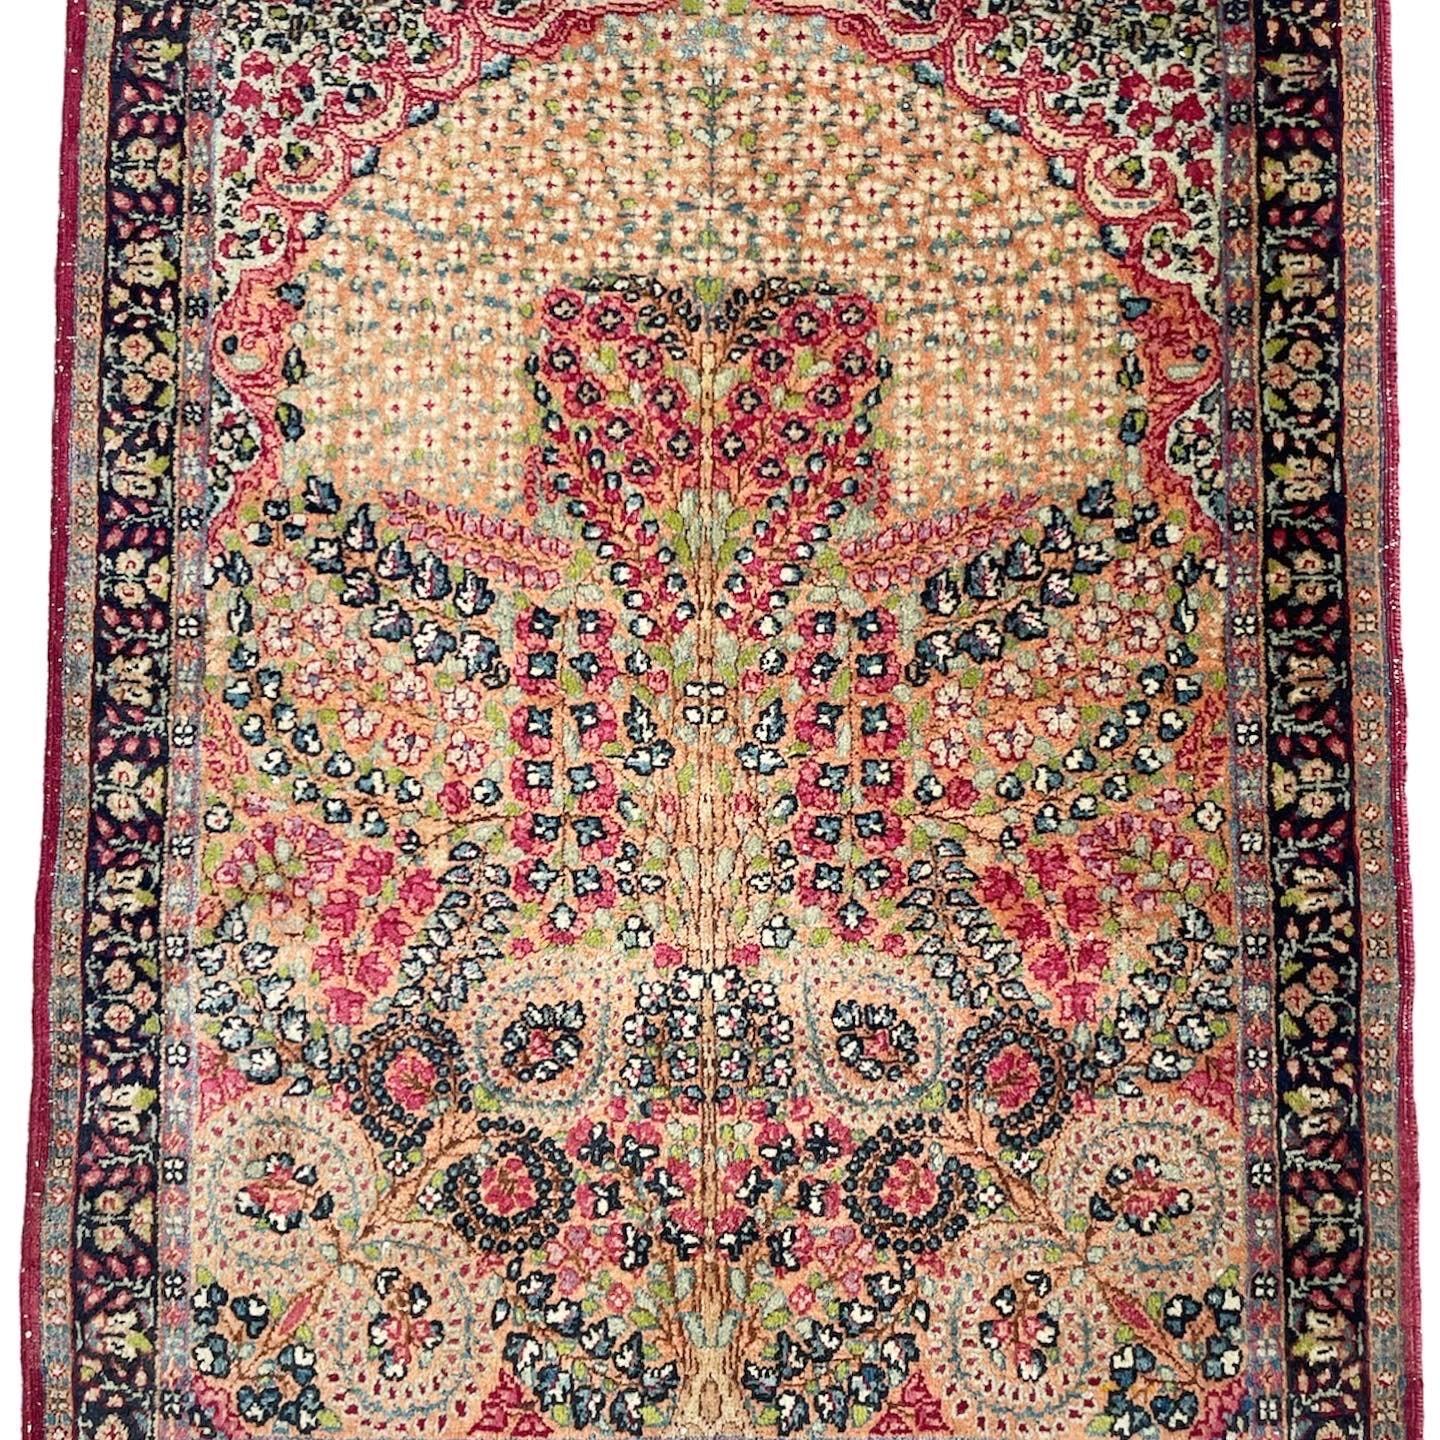 Supurb Antique Mat  Powerful Sprawling Tree Of Life Design, Silky Wool Natural Dyes 

About: Probably the best small mini antique rug mat we've ever seen. The attention to detail in this small of a piece is unheard of - meticulous weaving of